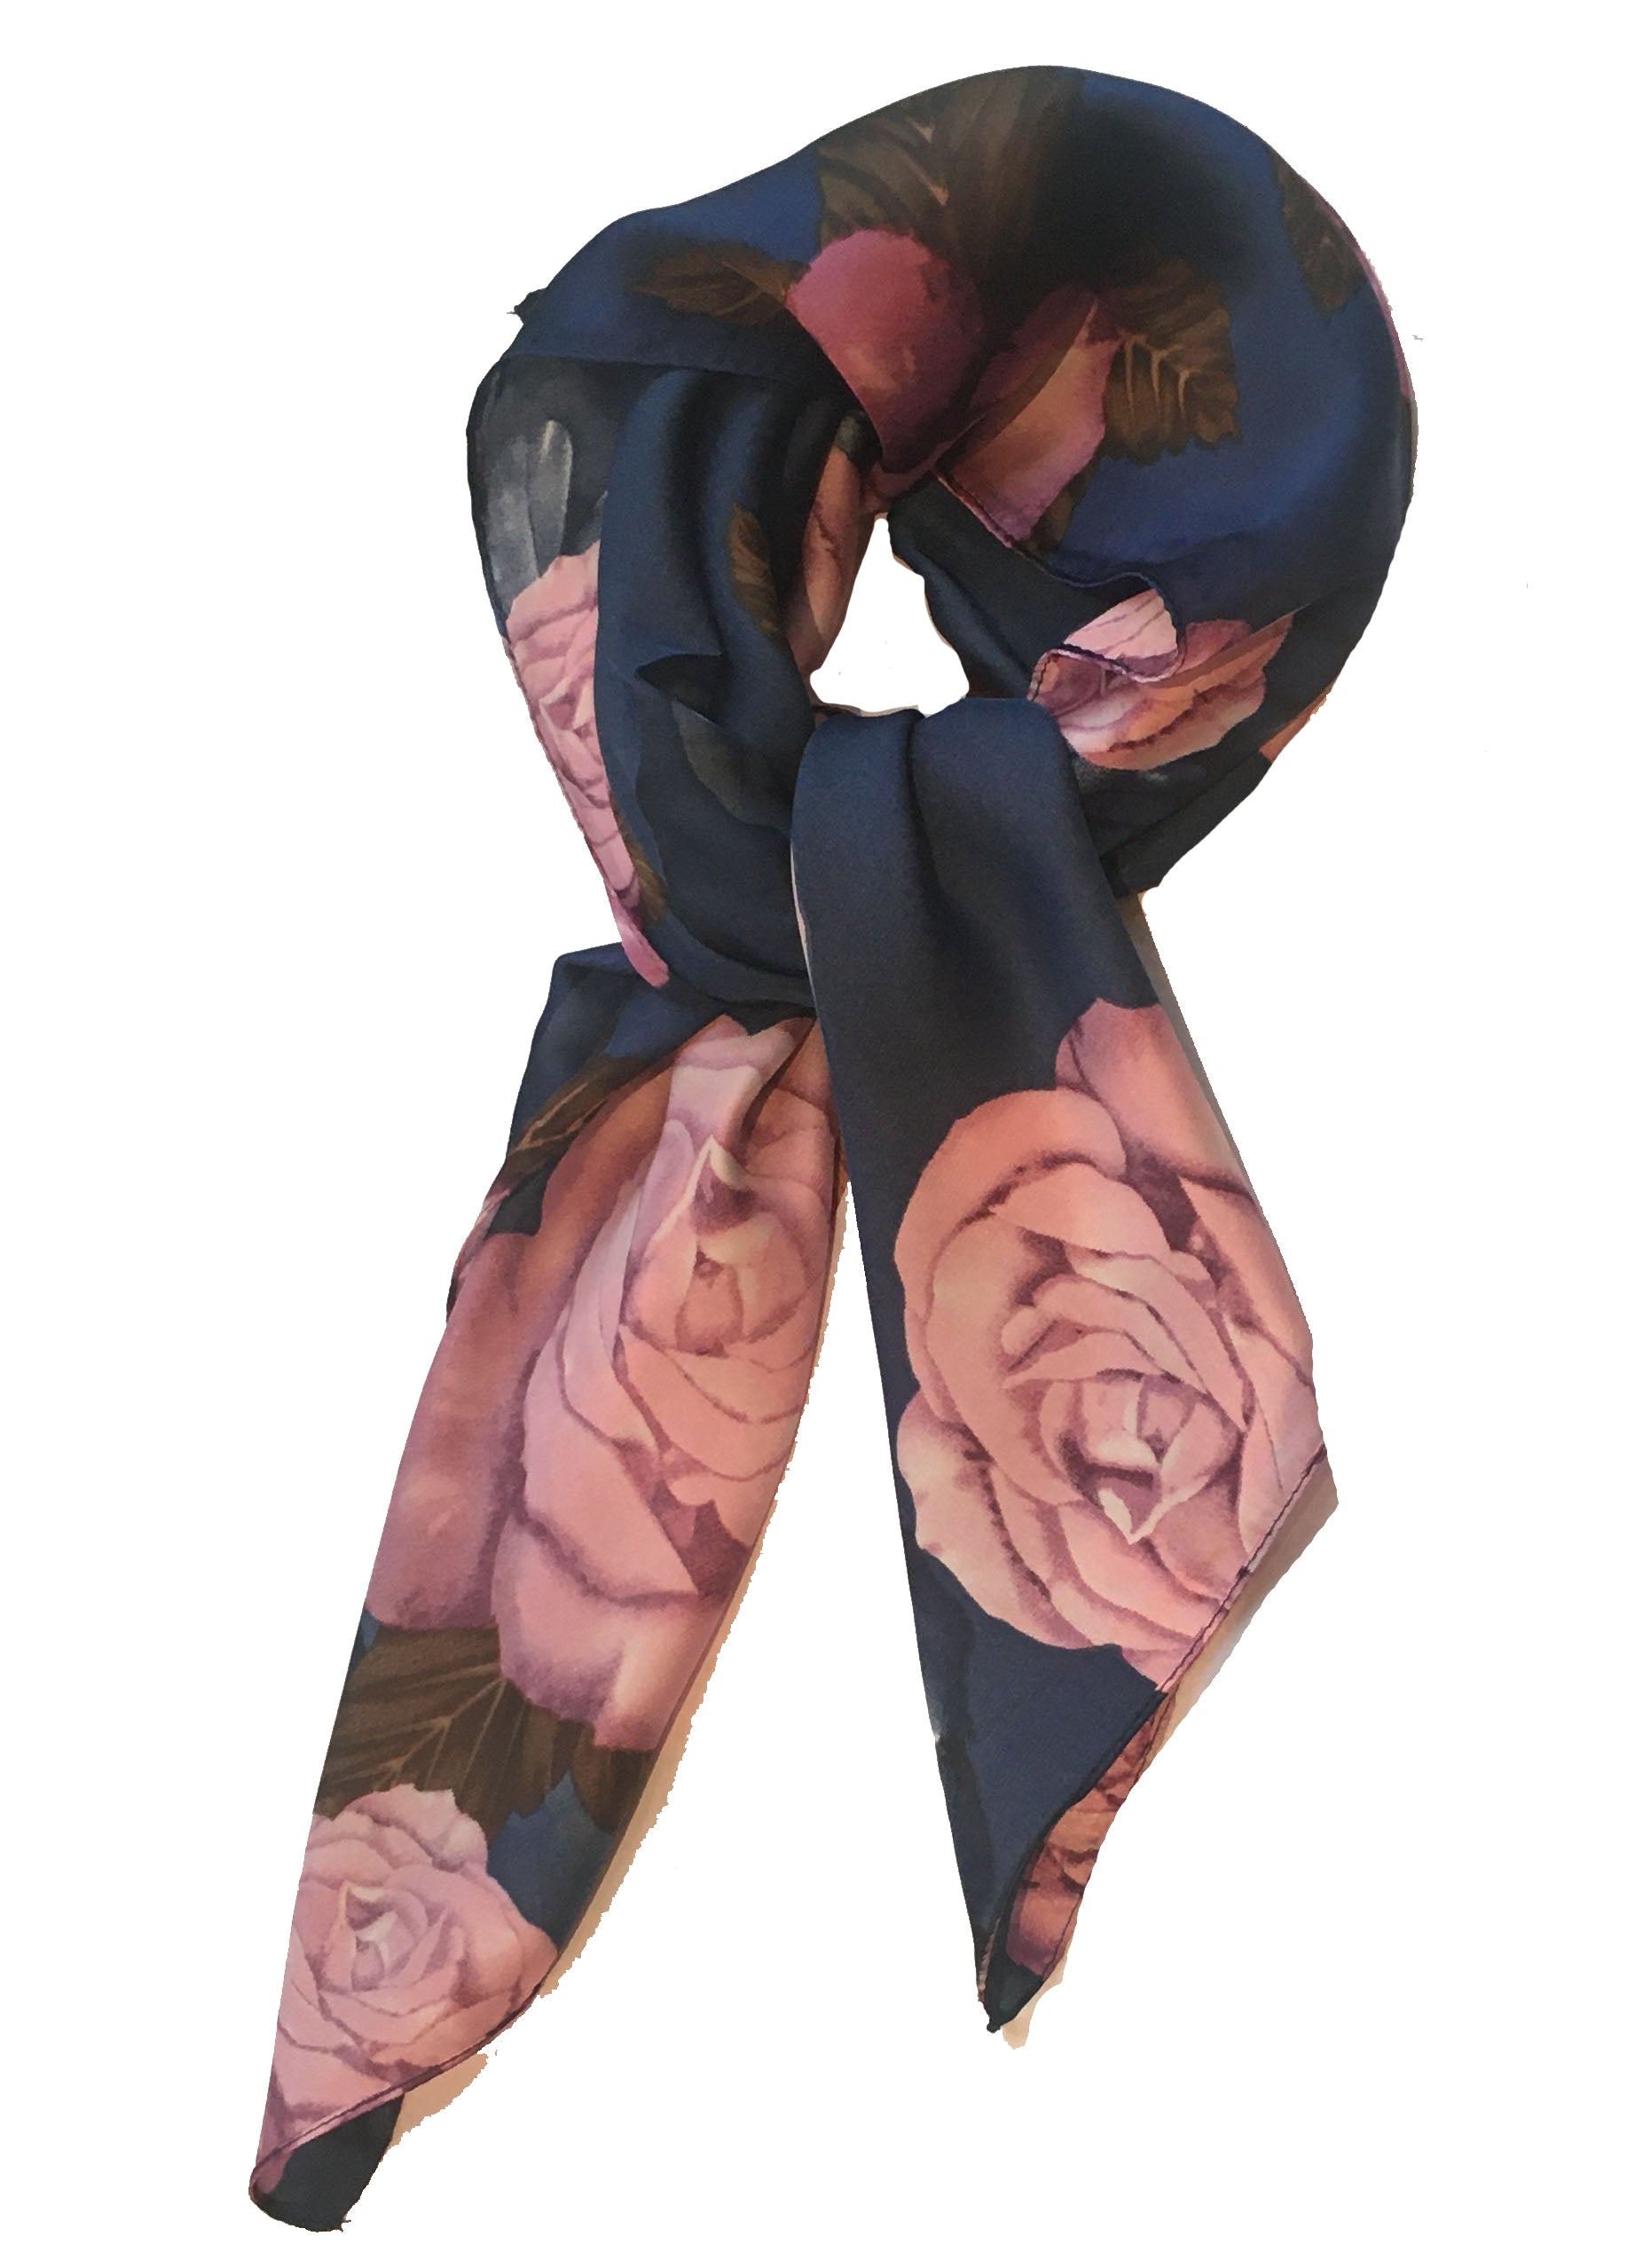 70cm x 70cm Square Scarf Navy Pink Rose Pattern Print Thin Silky Womens Summer Spring